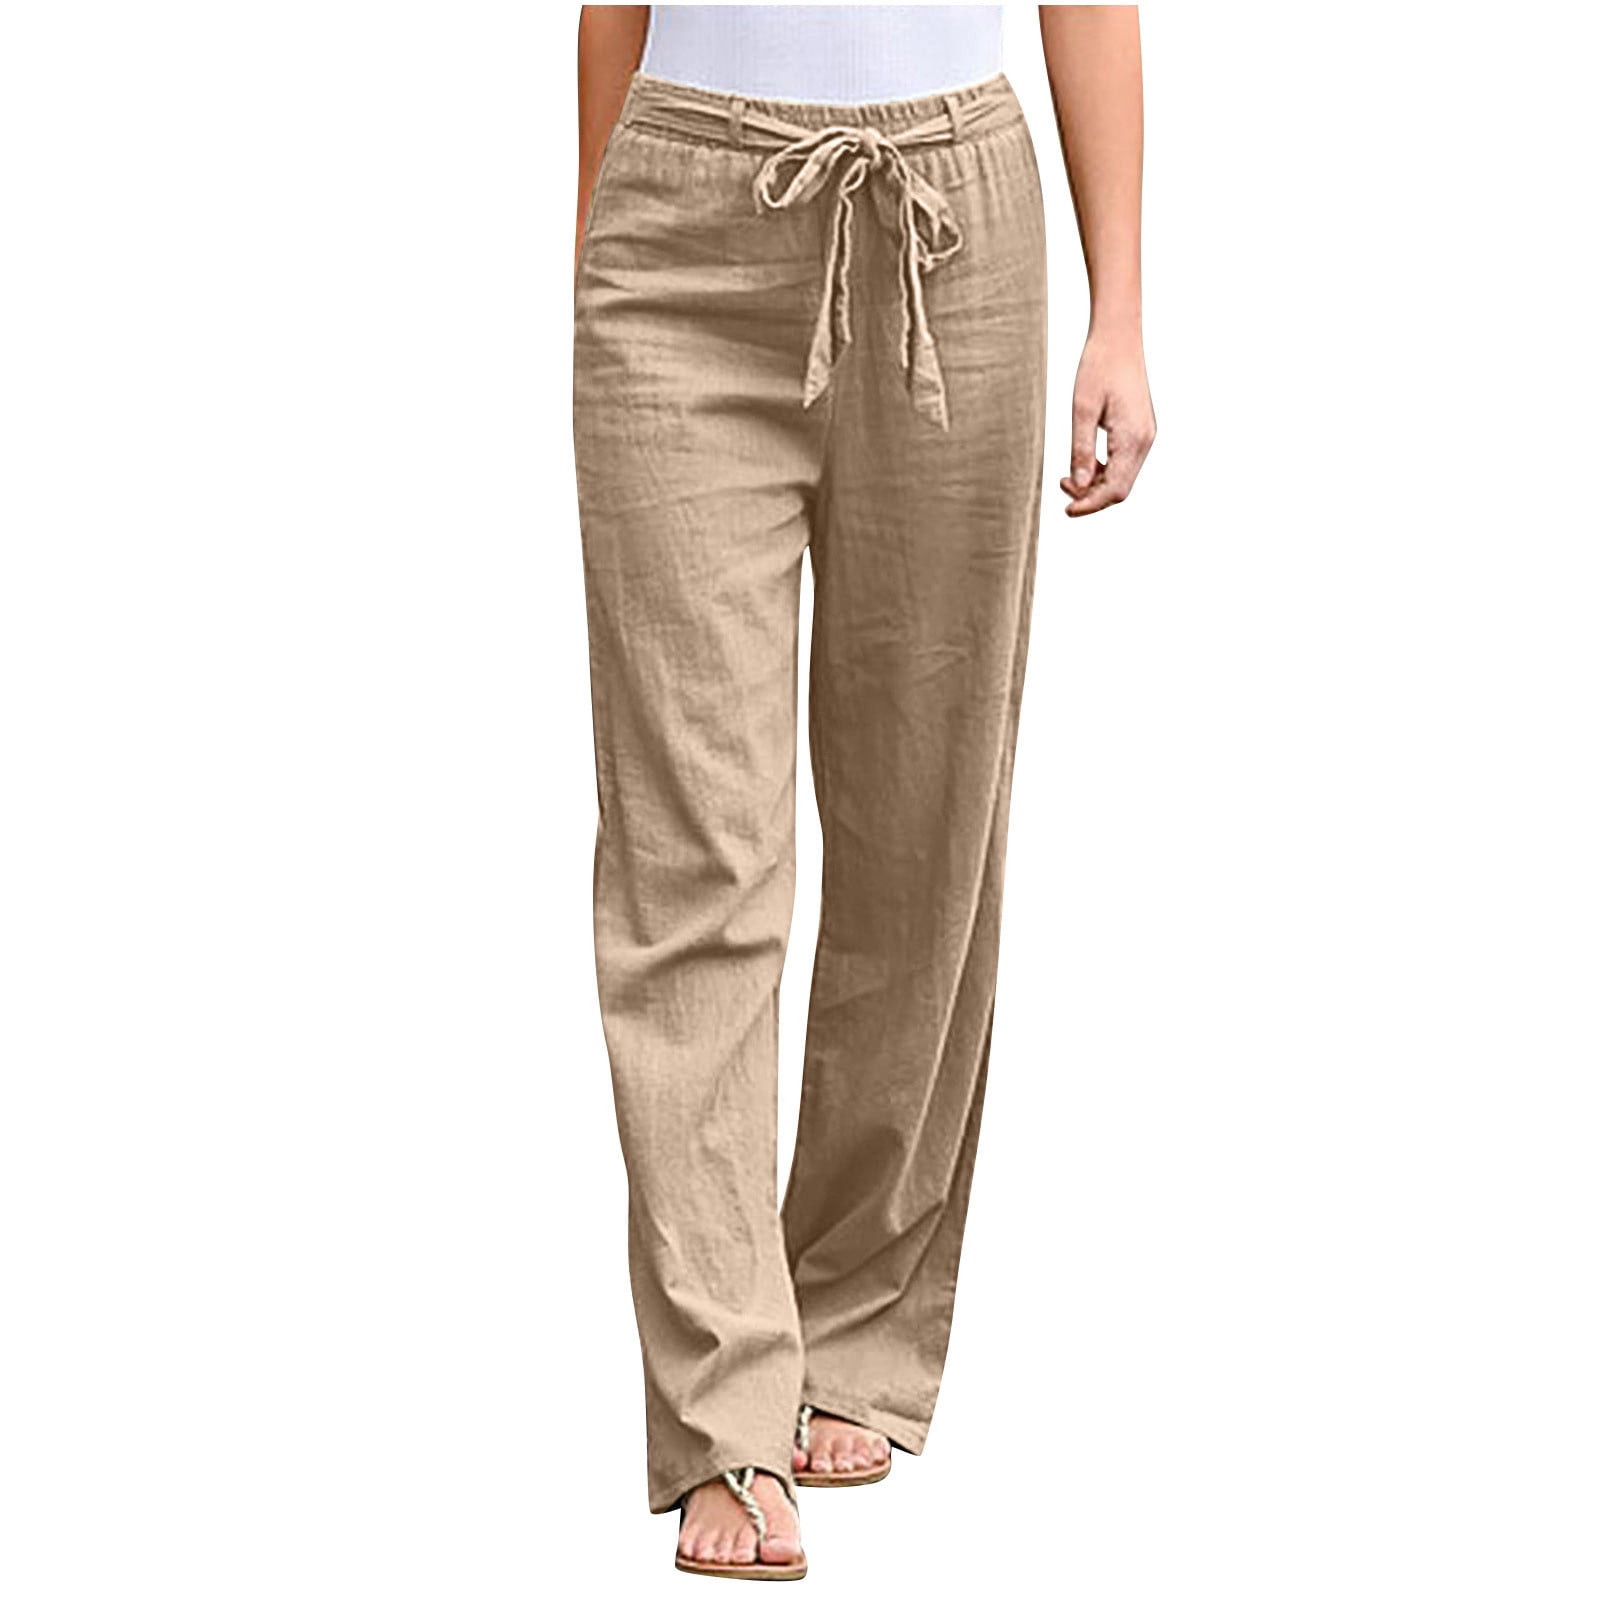  DGZTWLL Khaki Pants for Women Linen Pants Women Summer Petite Plus  Size High Waisted Tapered Pants Casual Joggers Yoga Sweatpants Trousers  Pockets(1-AG,Small) : Clothing, Shoes & Jewelry